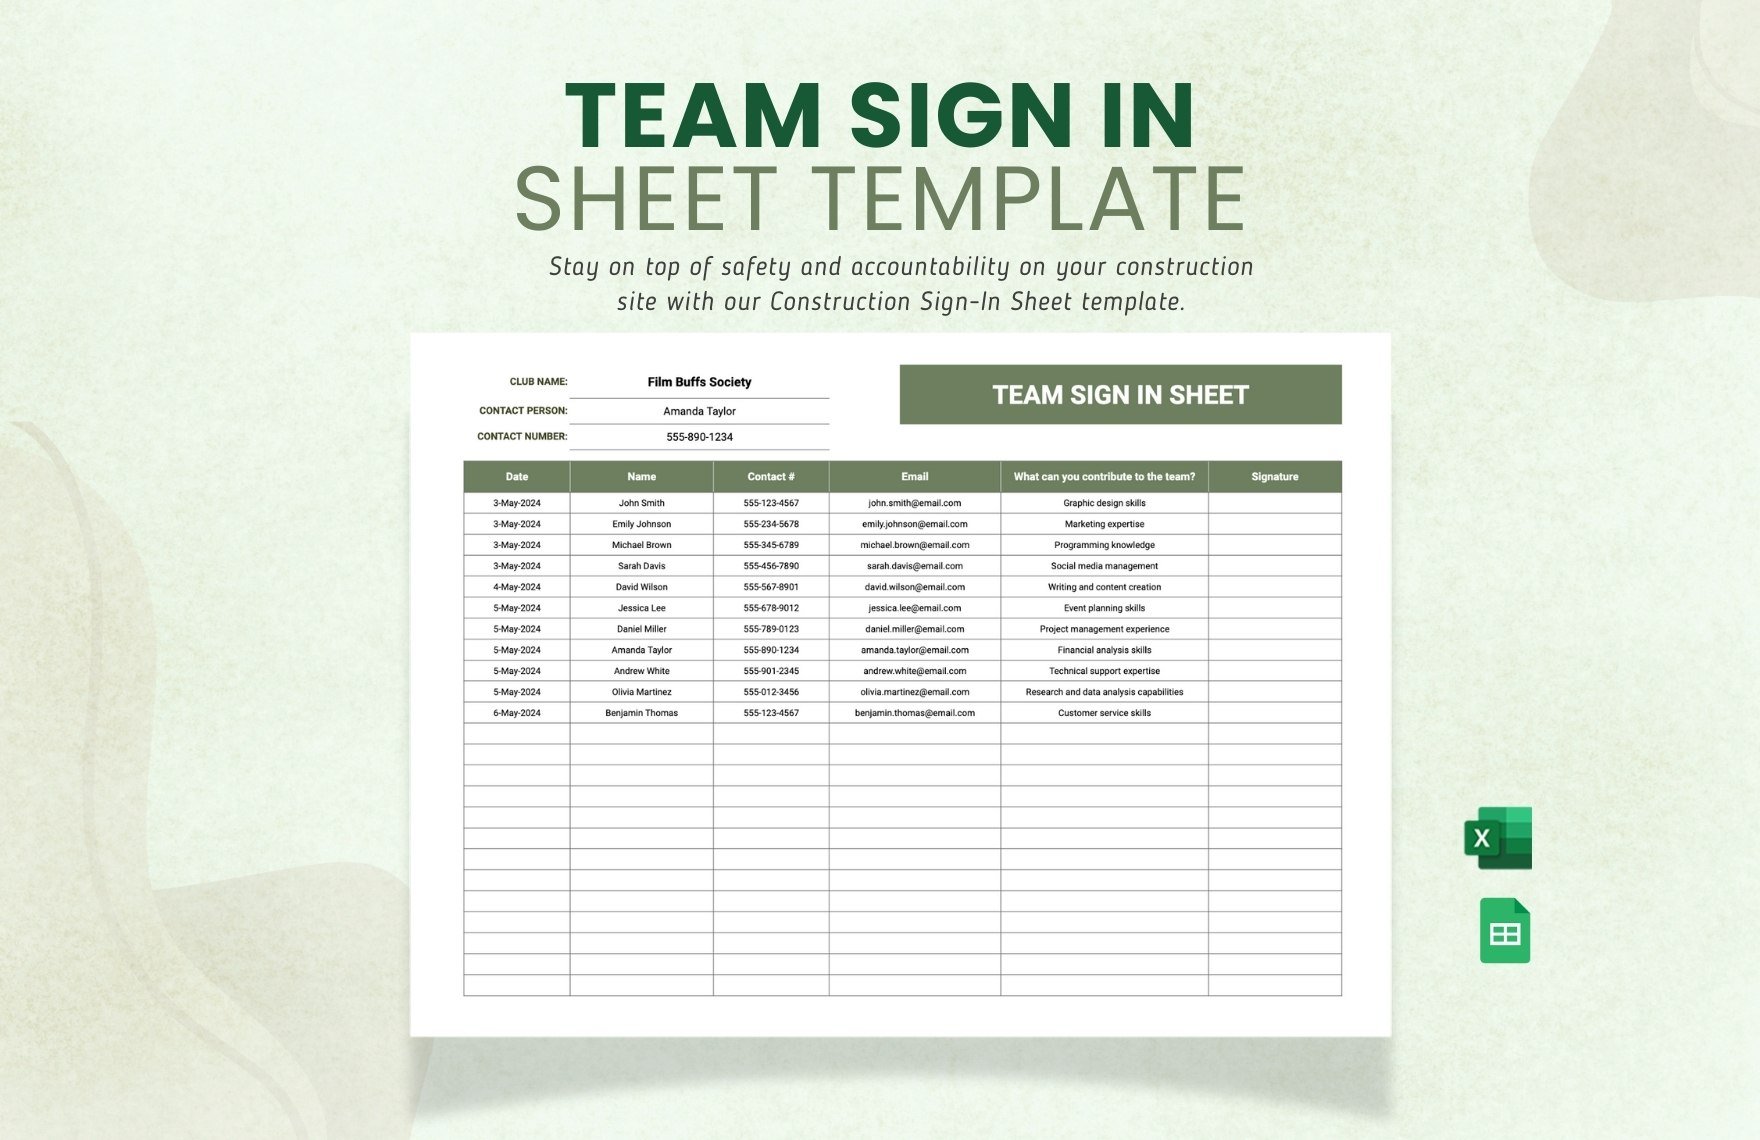 Team Sign in Sheet Template